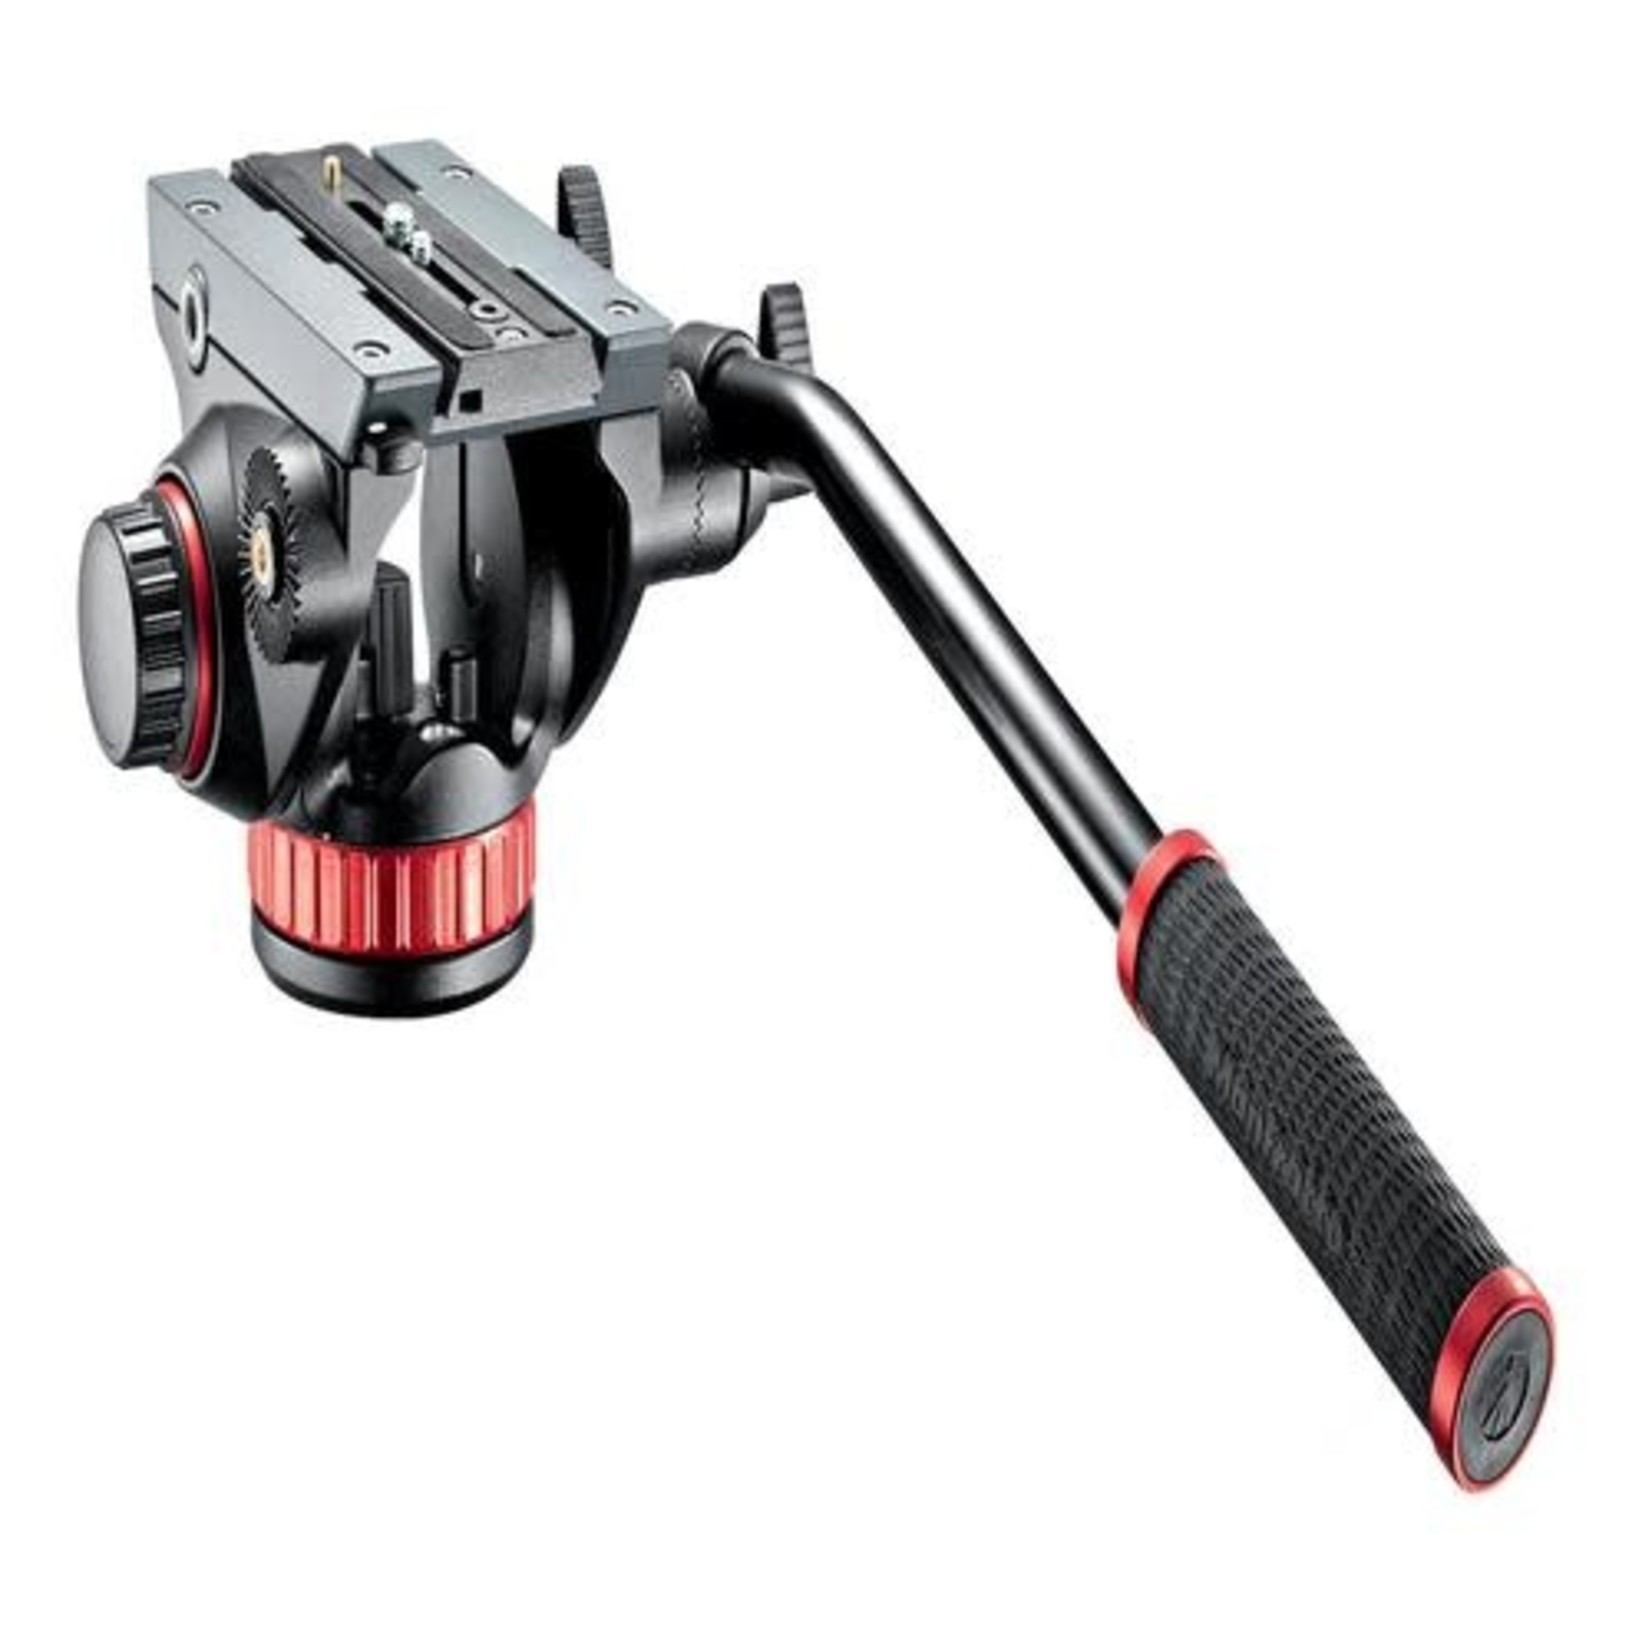 Manfrotto Manfrotto MVH502AH Pro Video Head w/Flat Base